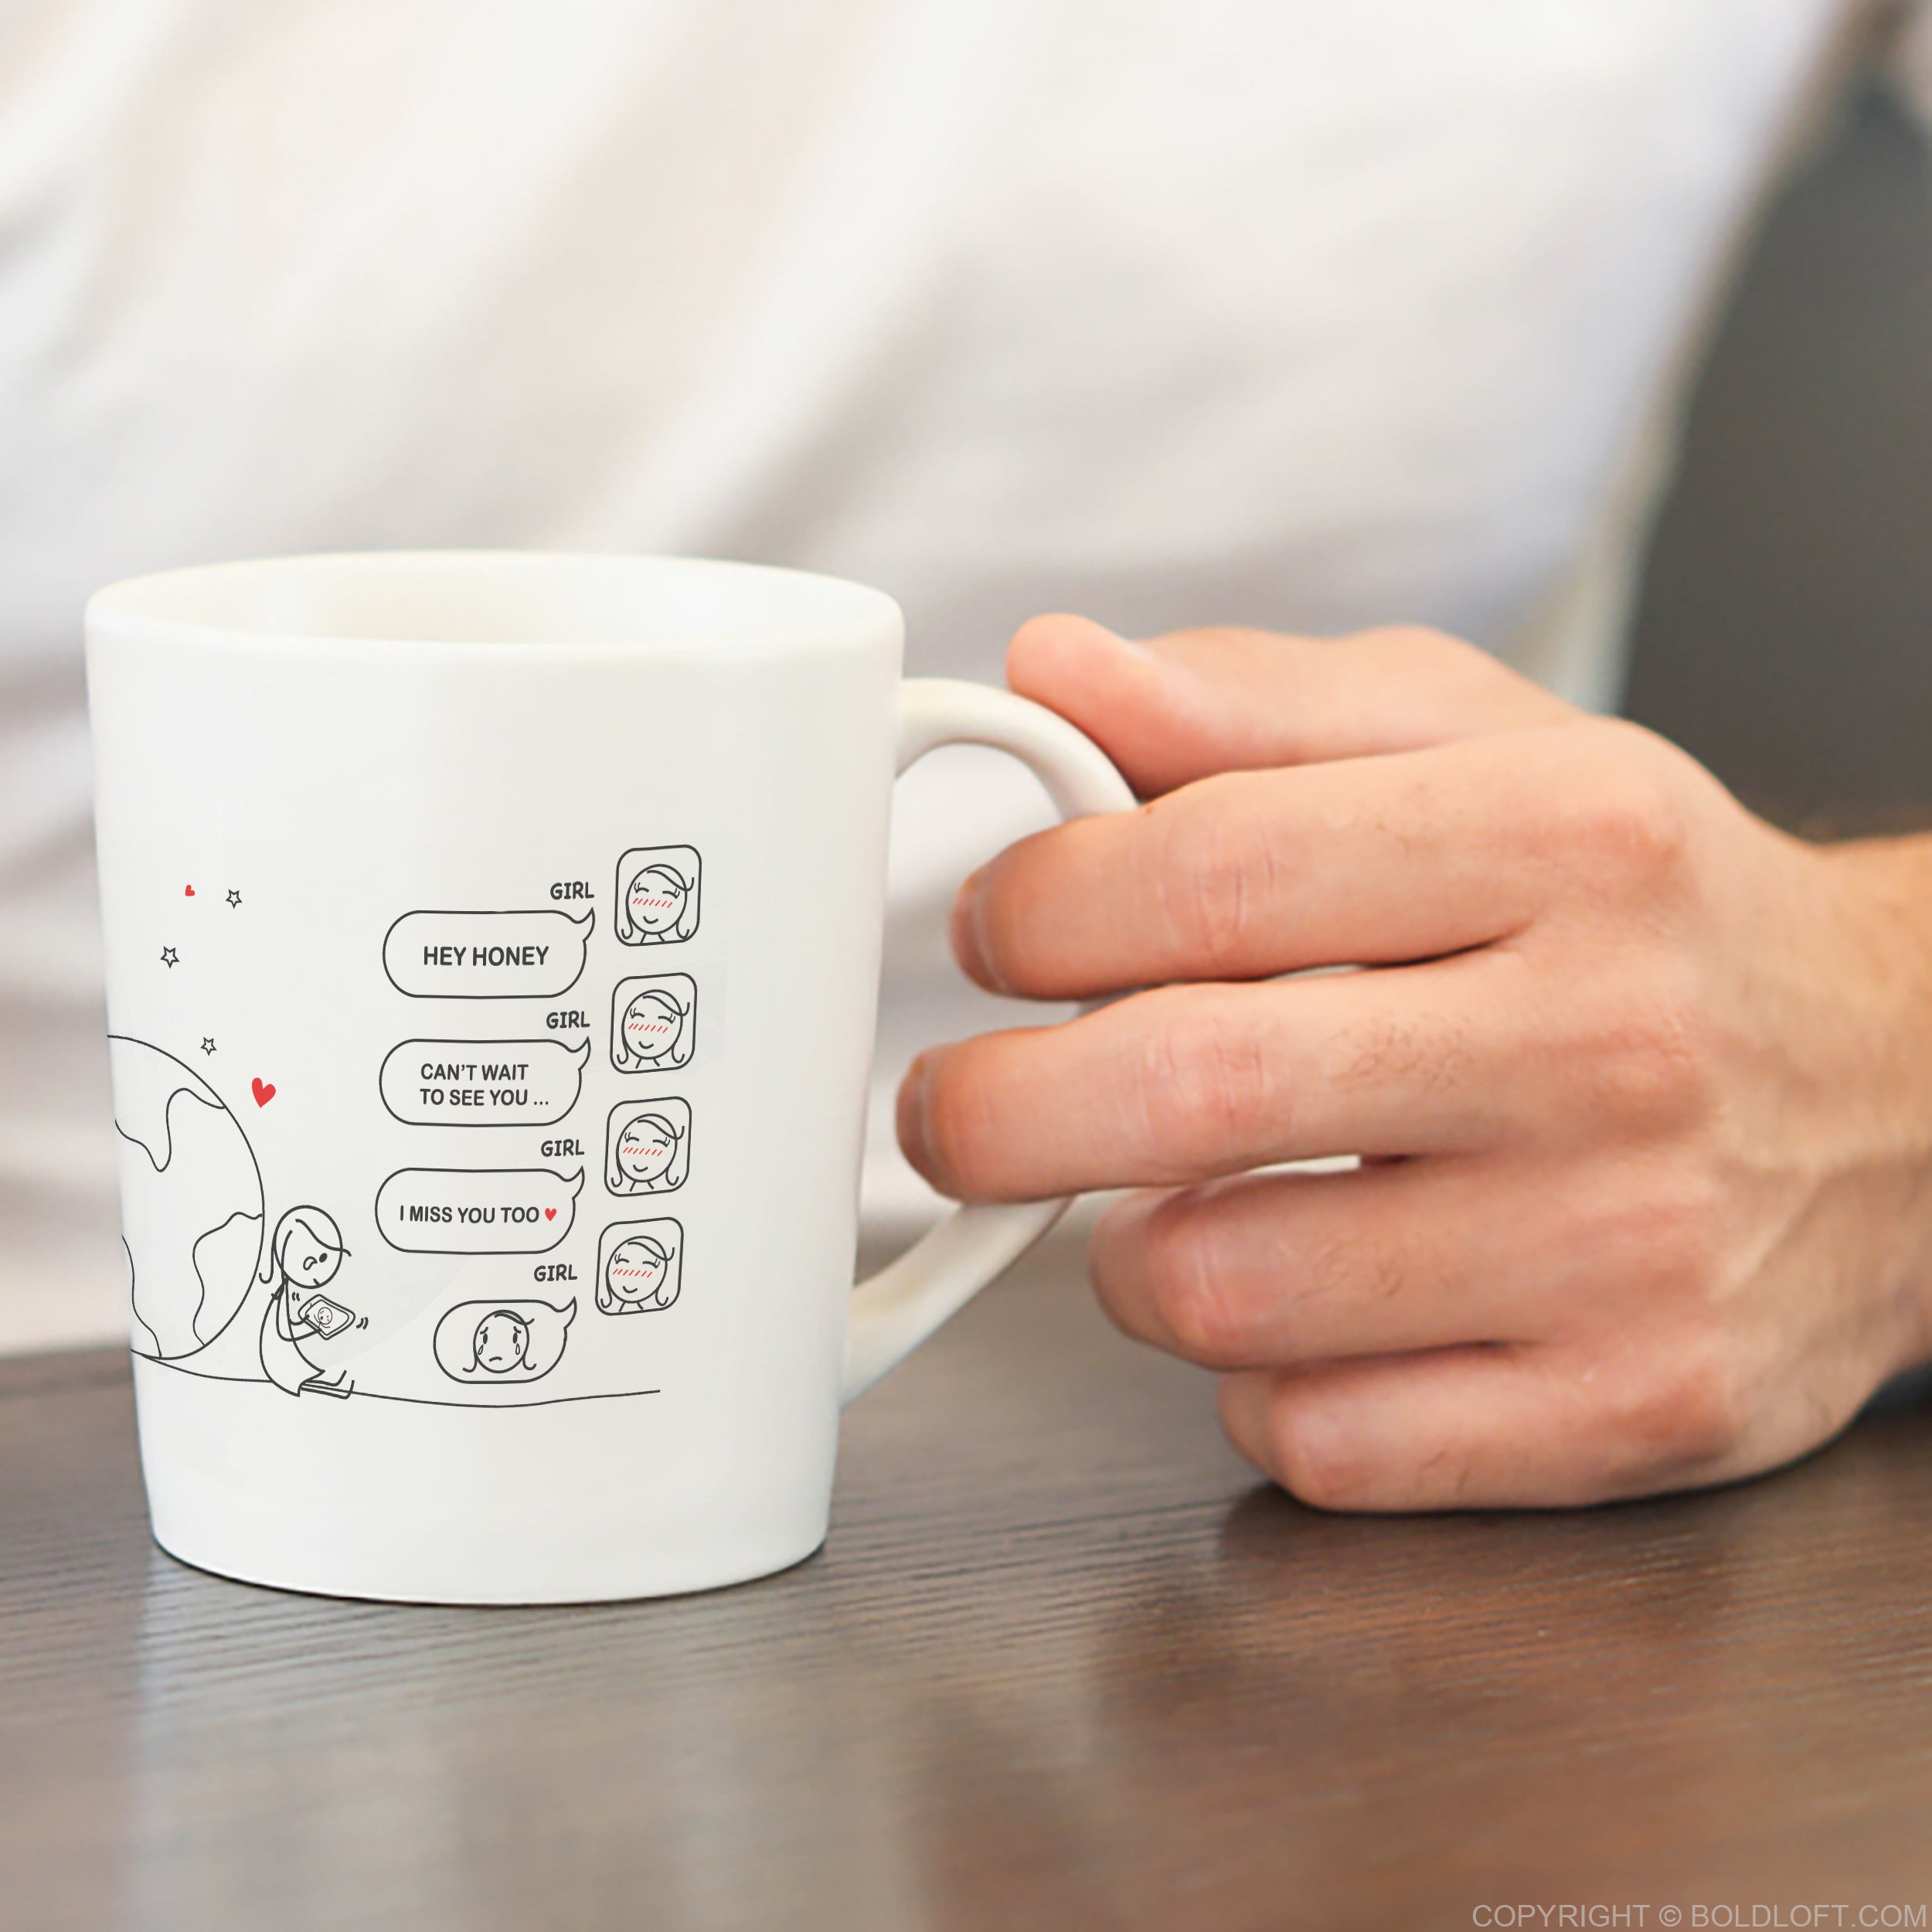 BoldLoft Wish You Were Here long distance couple coffee mugs: Connect over coffee, no matter the distance. Perfect long distance relationship gift for him.